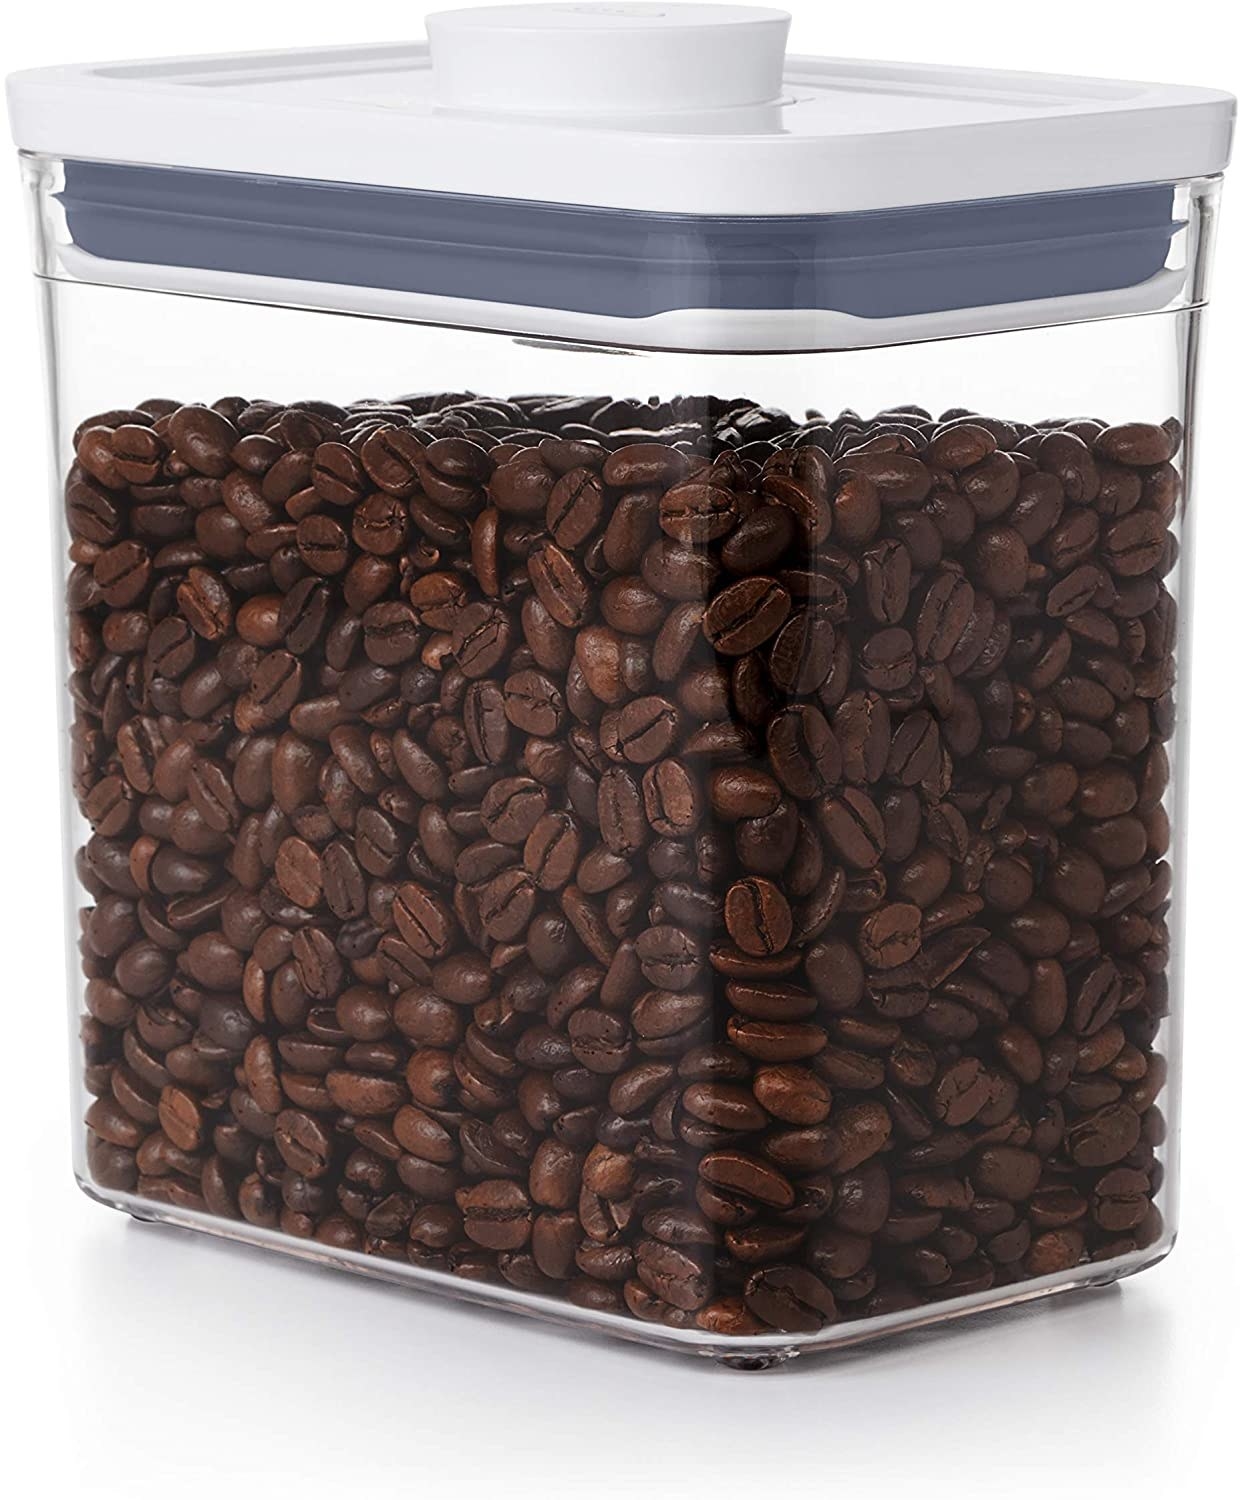 A clear container filled with coffee beans